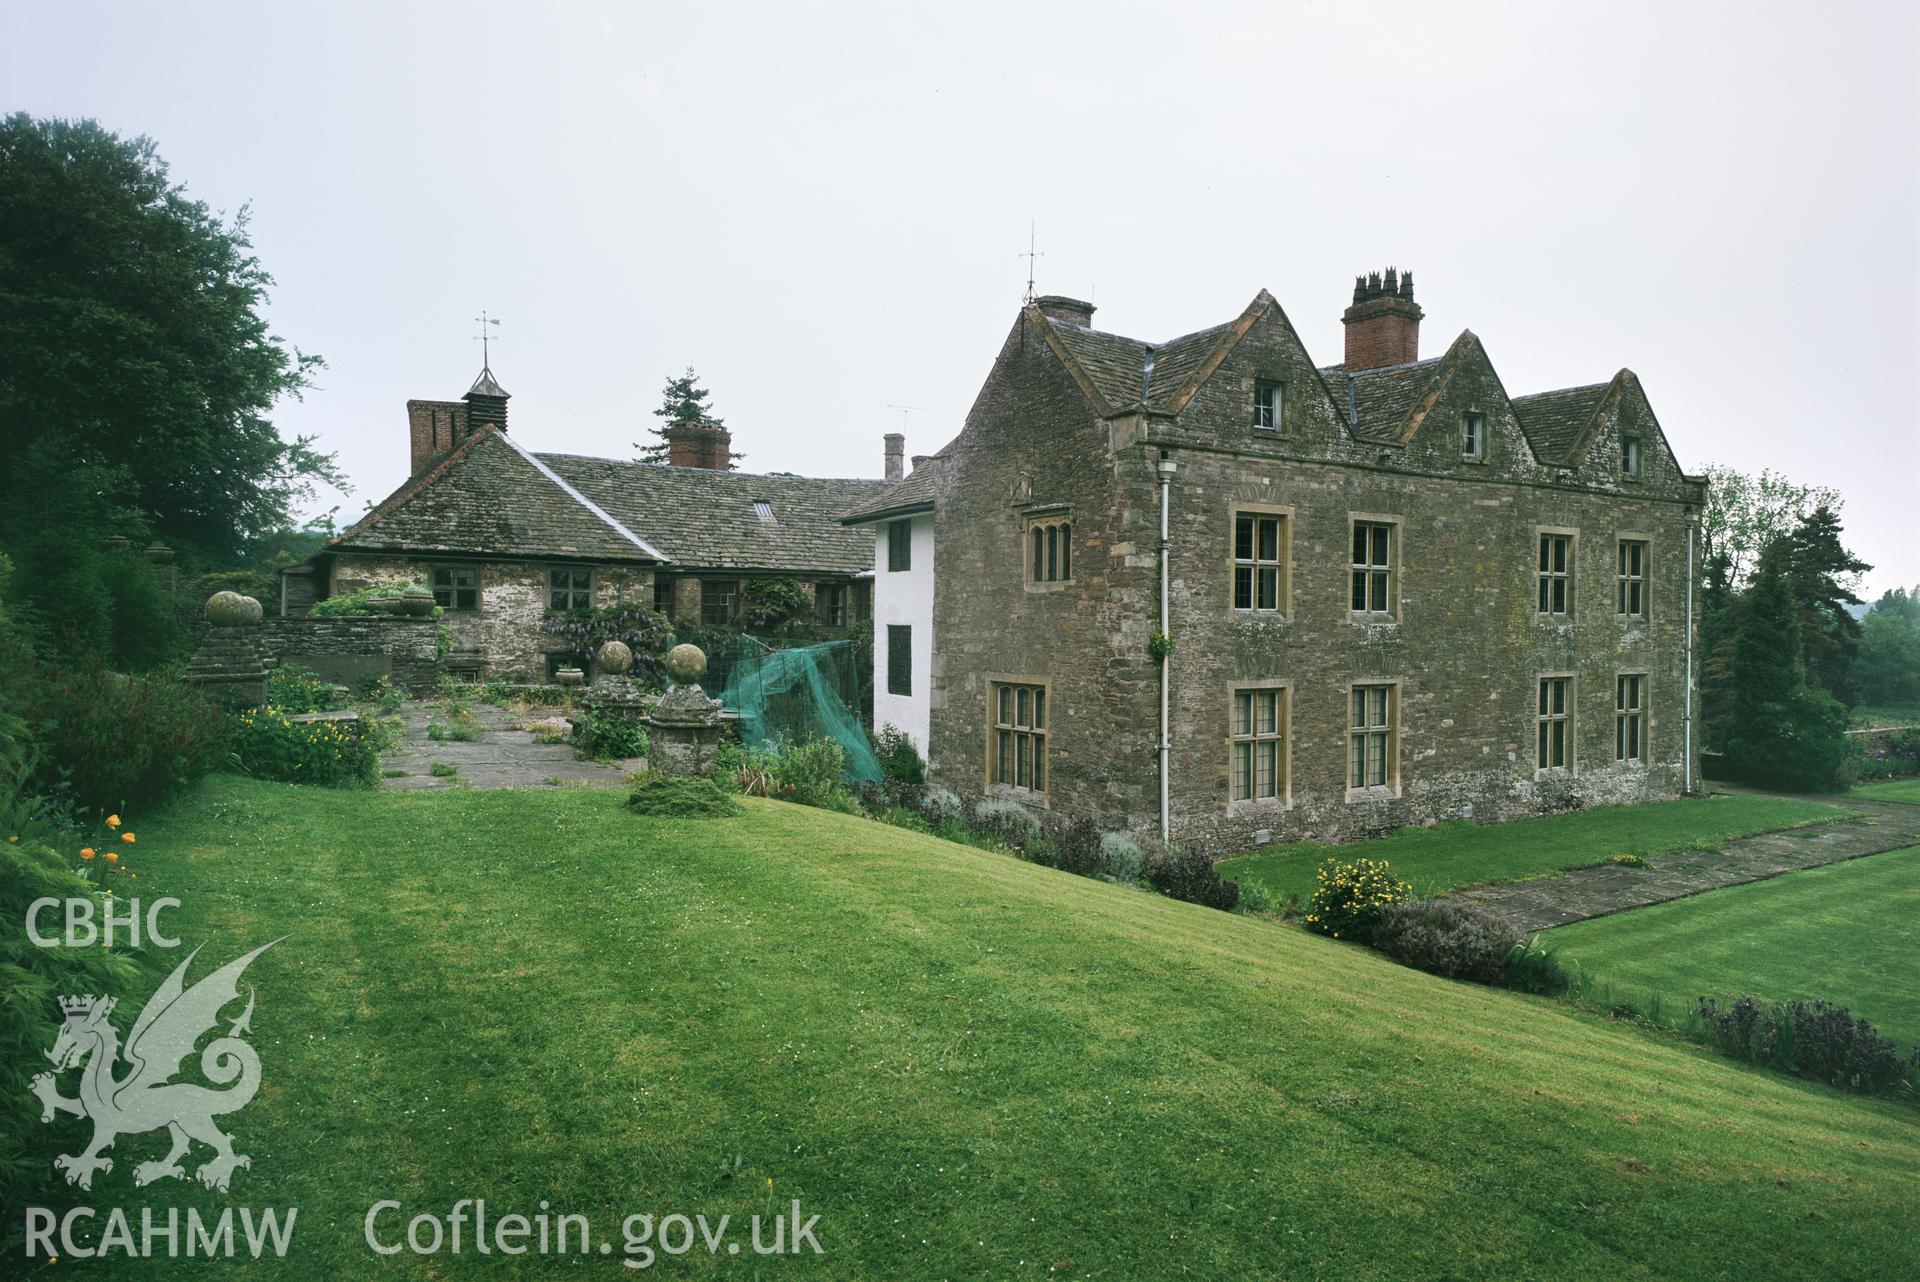 RCAHMW colour transparency showing view of Llanfihangel Court, taken by I.N. Wright, 1979.